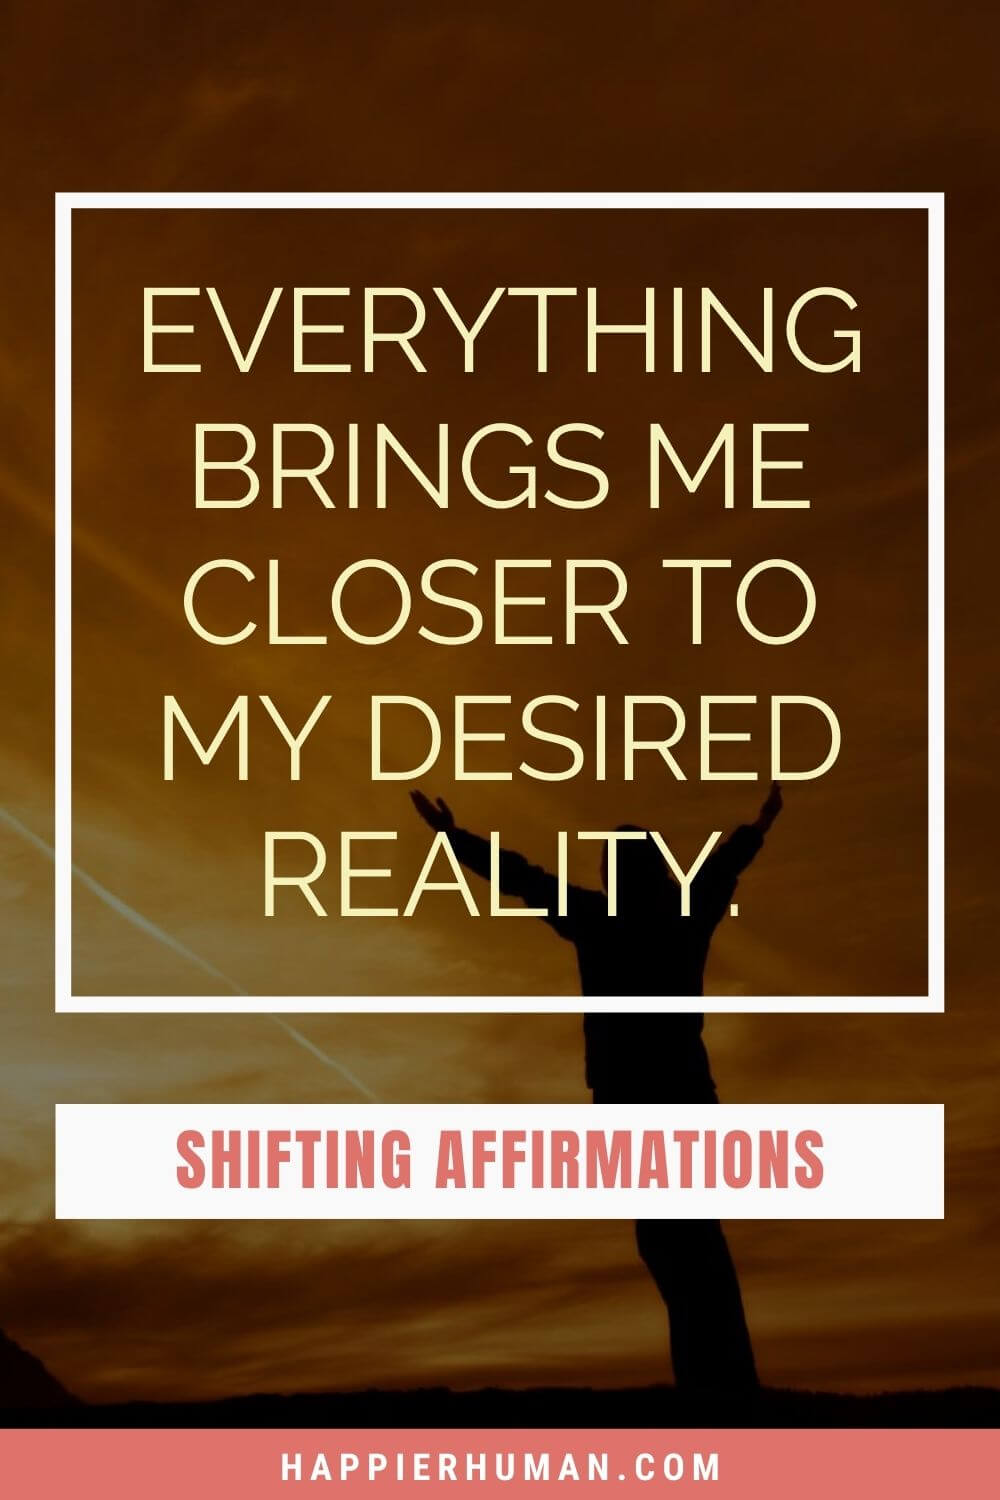 Shifting Affirmations - Everything brings me closer to my desired reality. | 100 shifting affirmations | shifting affirmations | shifting affirmations for hogwarts